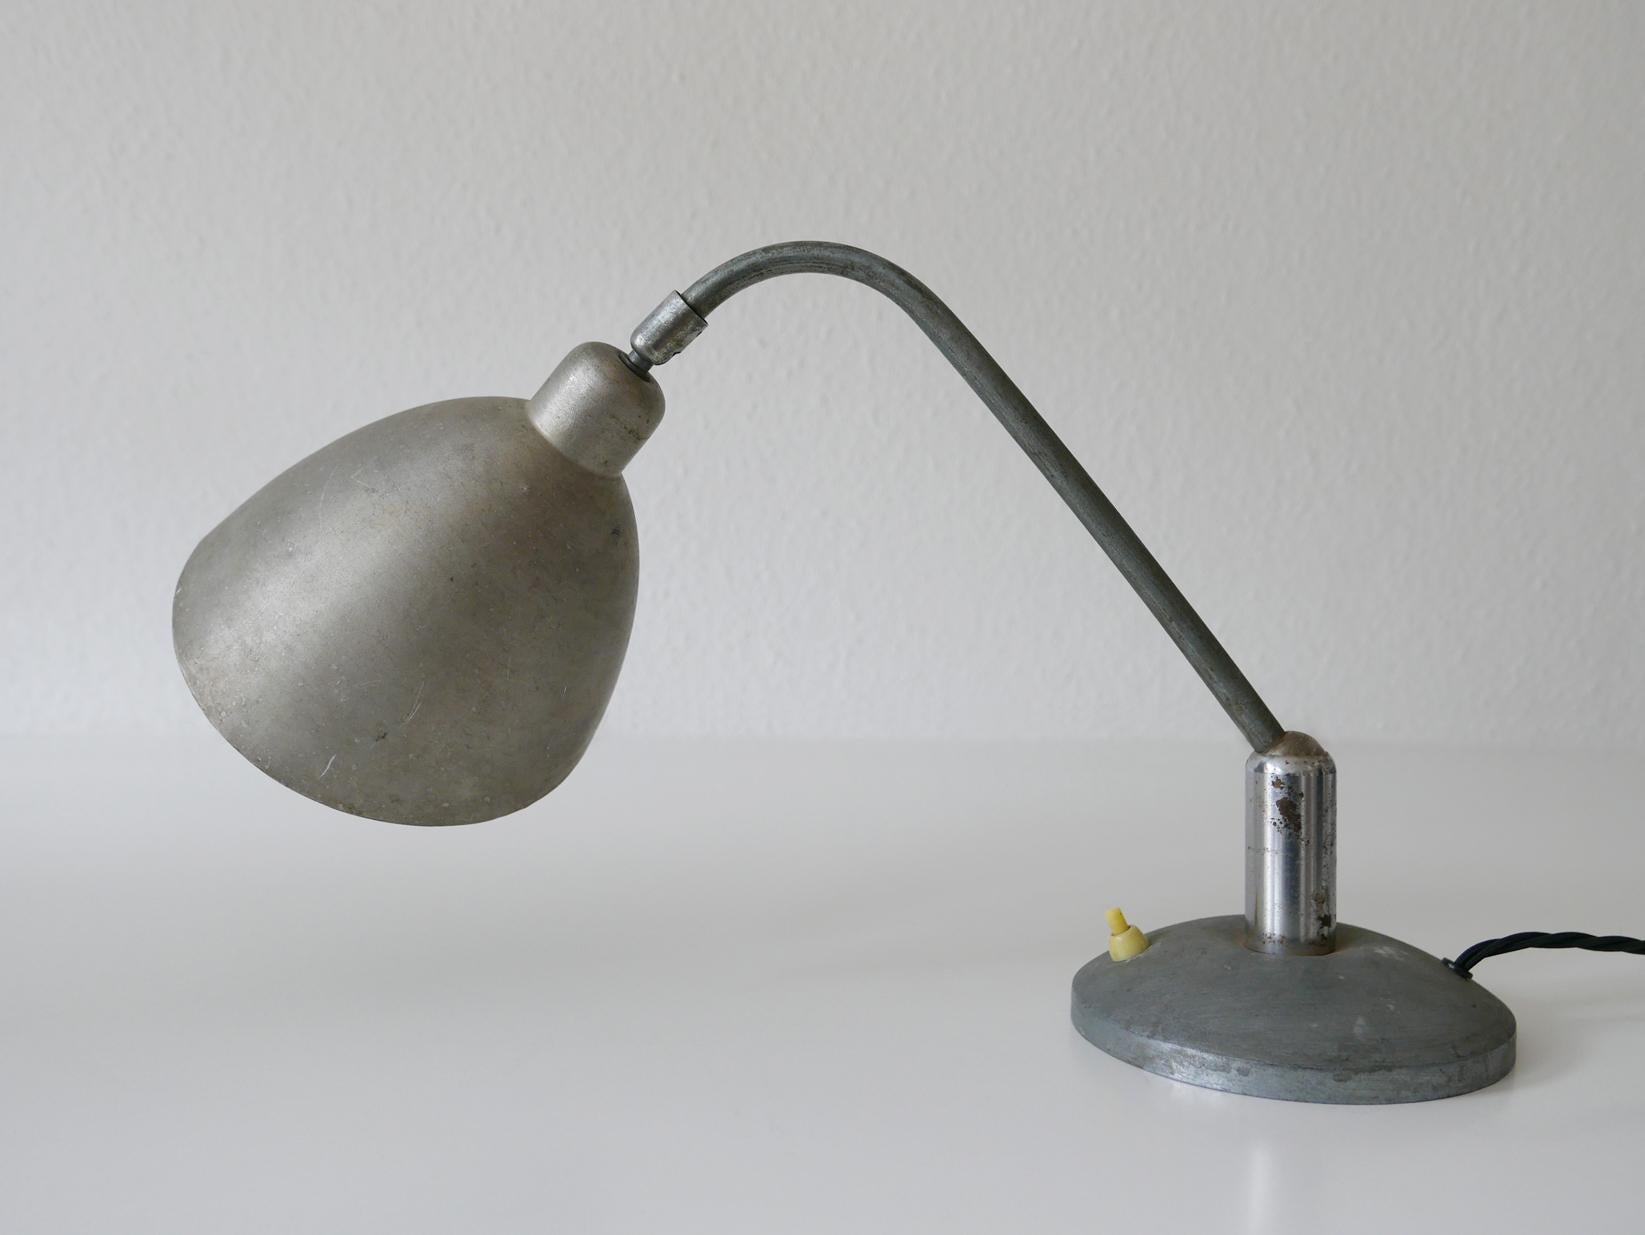 Rare Czech Functionalist or Bauhaus Table Lamp by Franta ‘Frantisek’ Anyz, 1920s In Fair Condition For Sale In Munich, DE